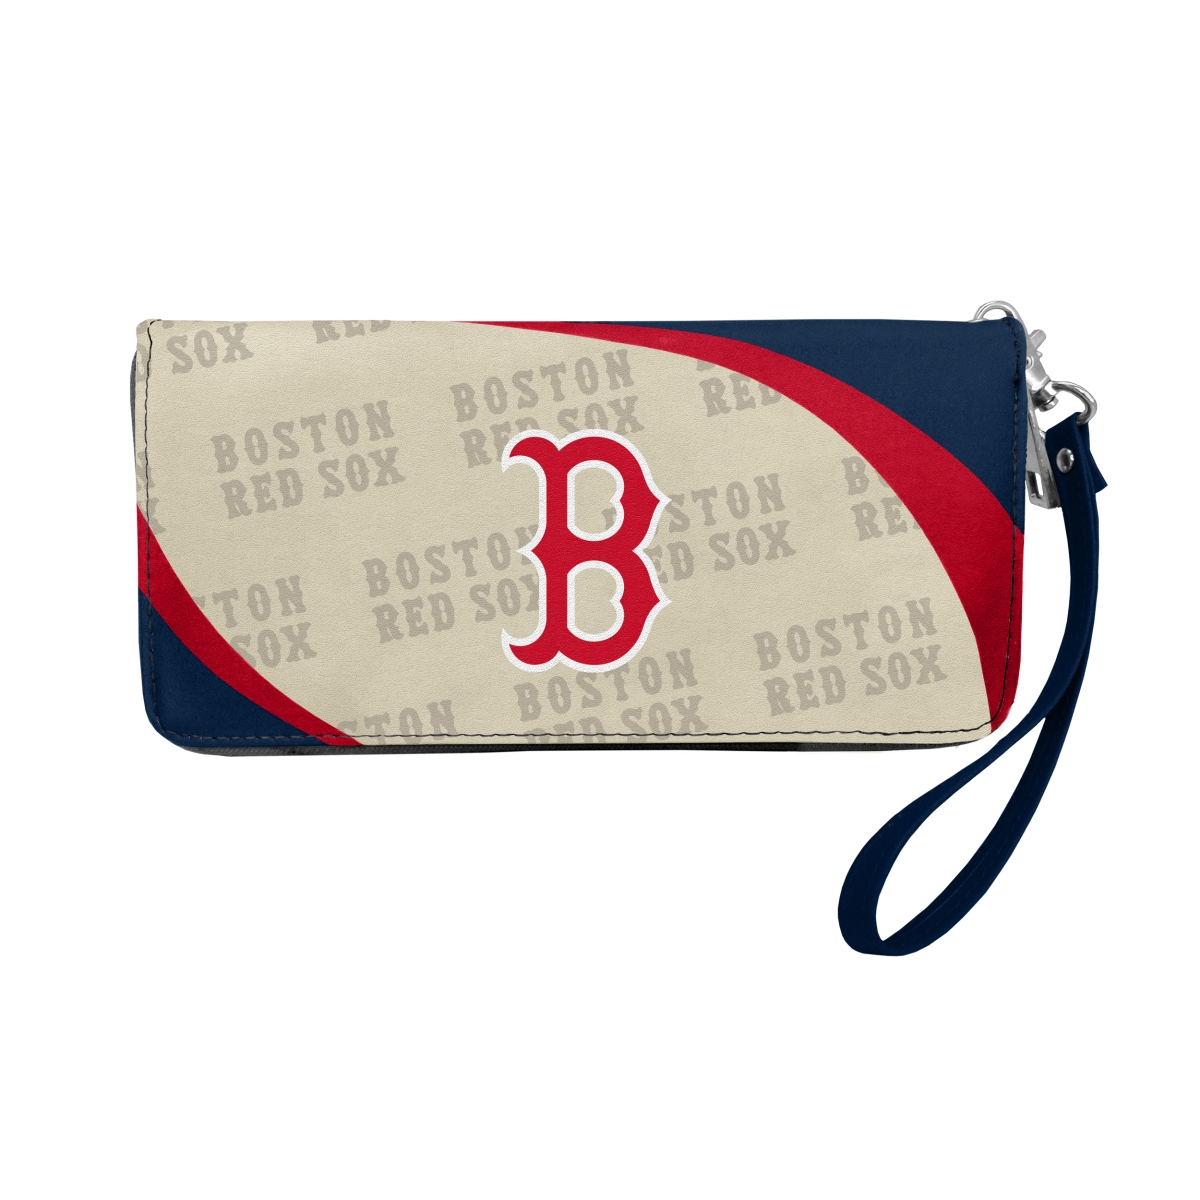 Picture of Little Earth 600902-RDSX MLB Curve Zip Organizer Wallet - Boston Red Sox